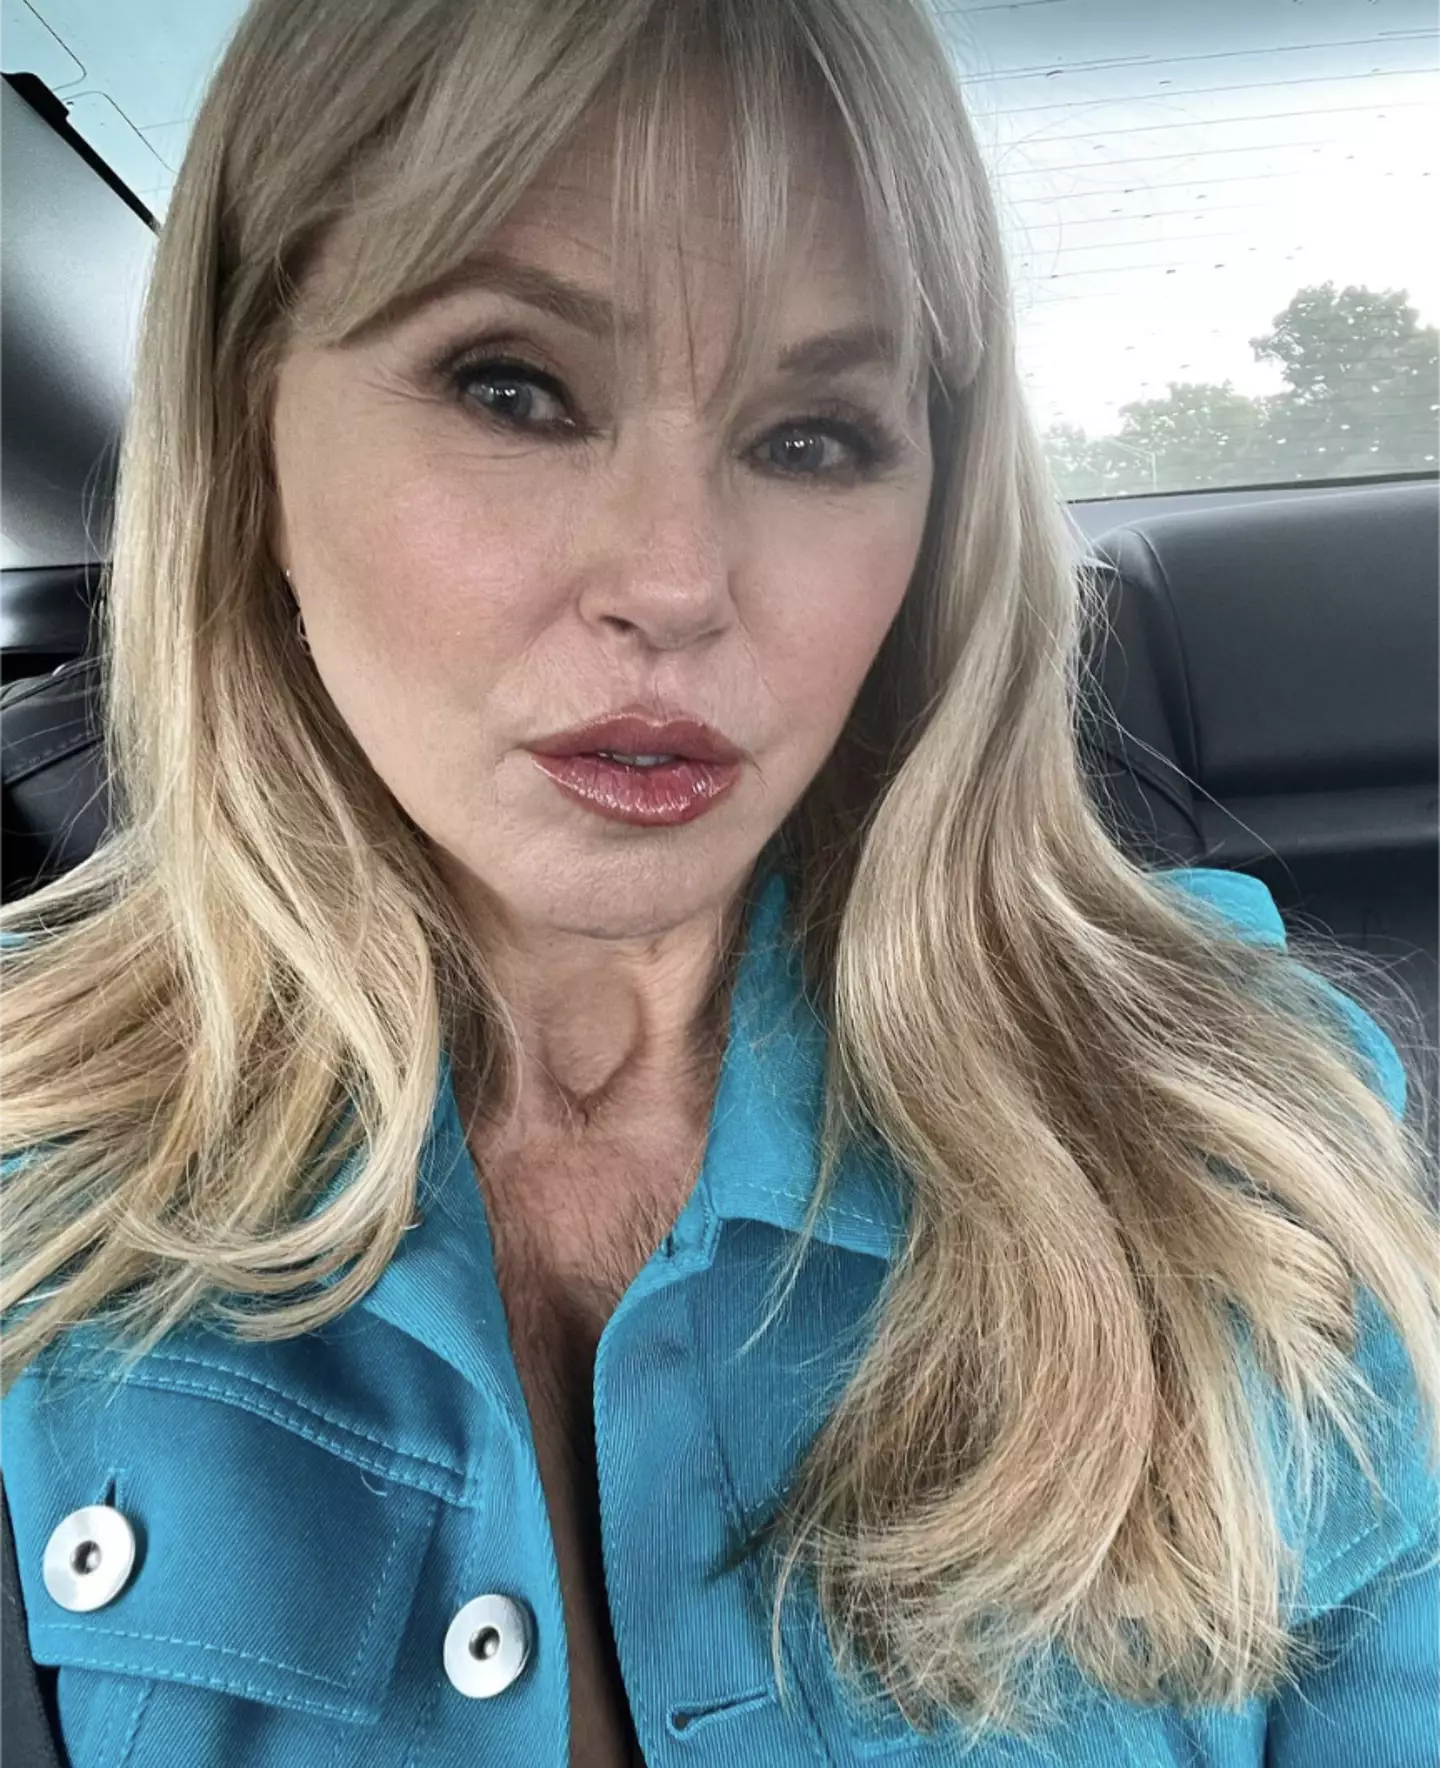 Christie Brinkley hit out at trolls who made cruel comments about her wrinkles.